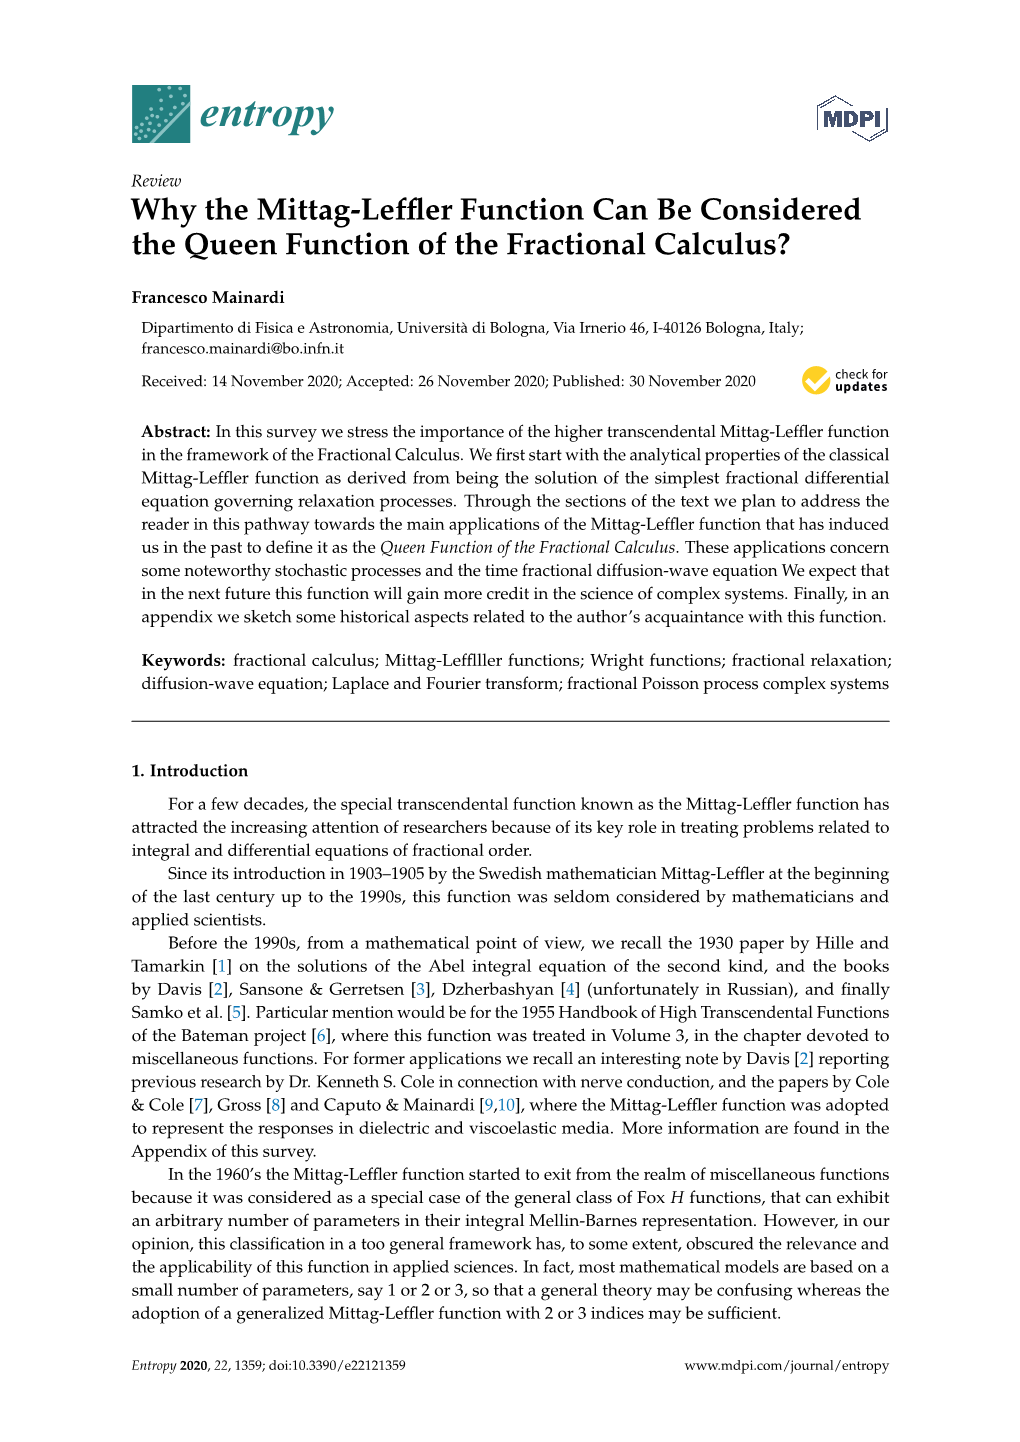 Why the Mittag-Leffler Function Can Be Considered the Queen Function of the Fractional Calculus?